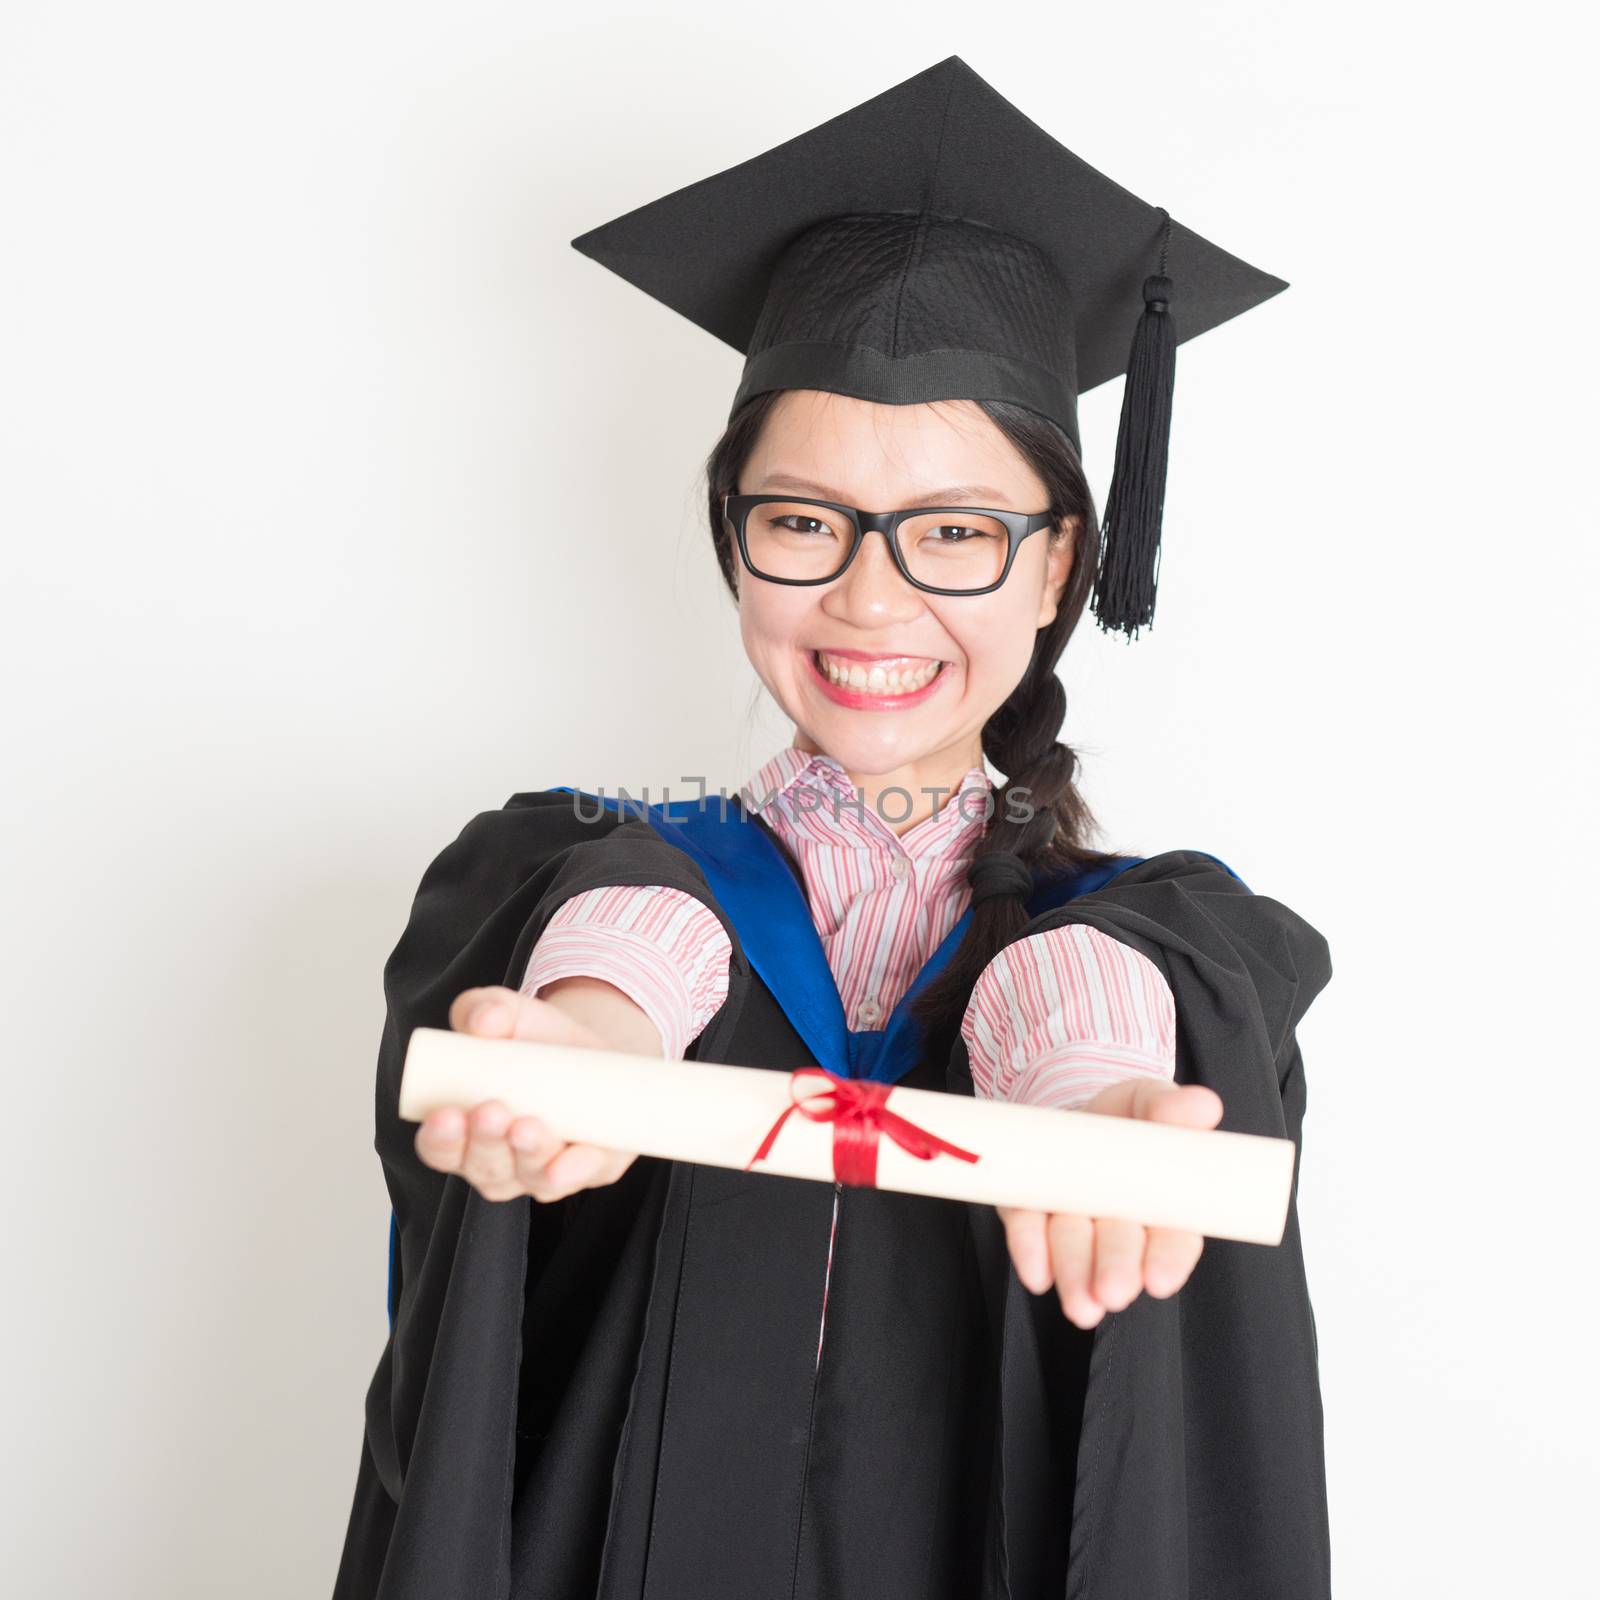 Happy university student in graduation gown and cap showing diploma certificate. Portrait of east  Asian female model standing on plain background.